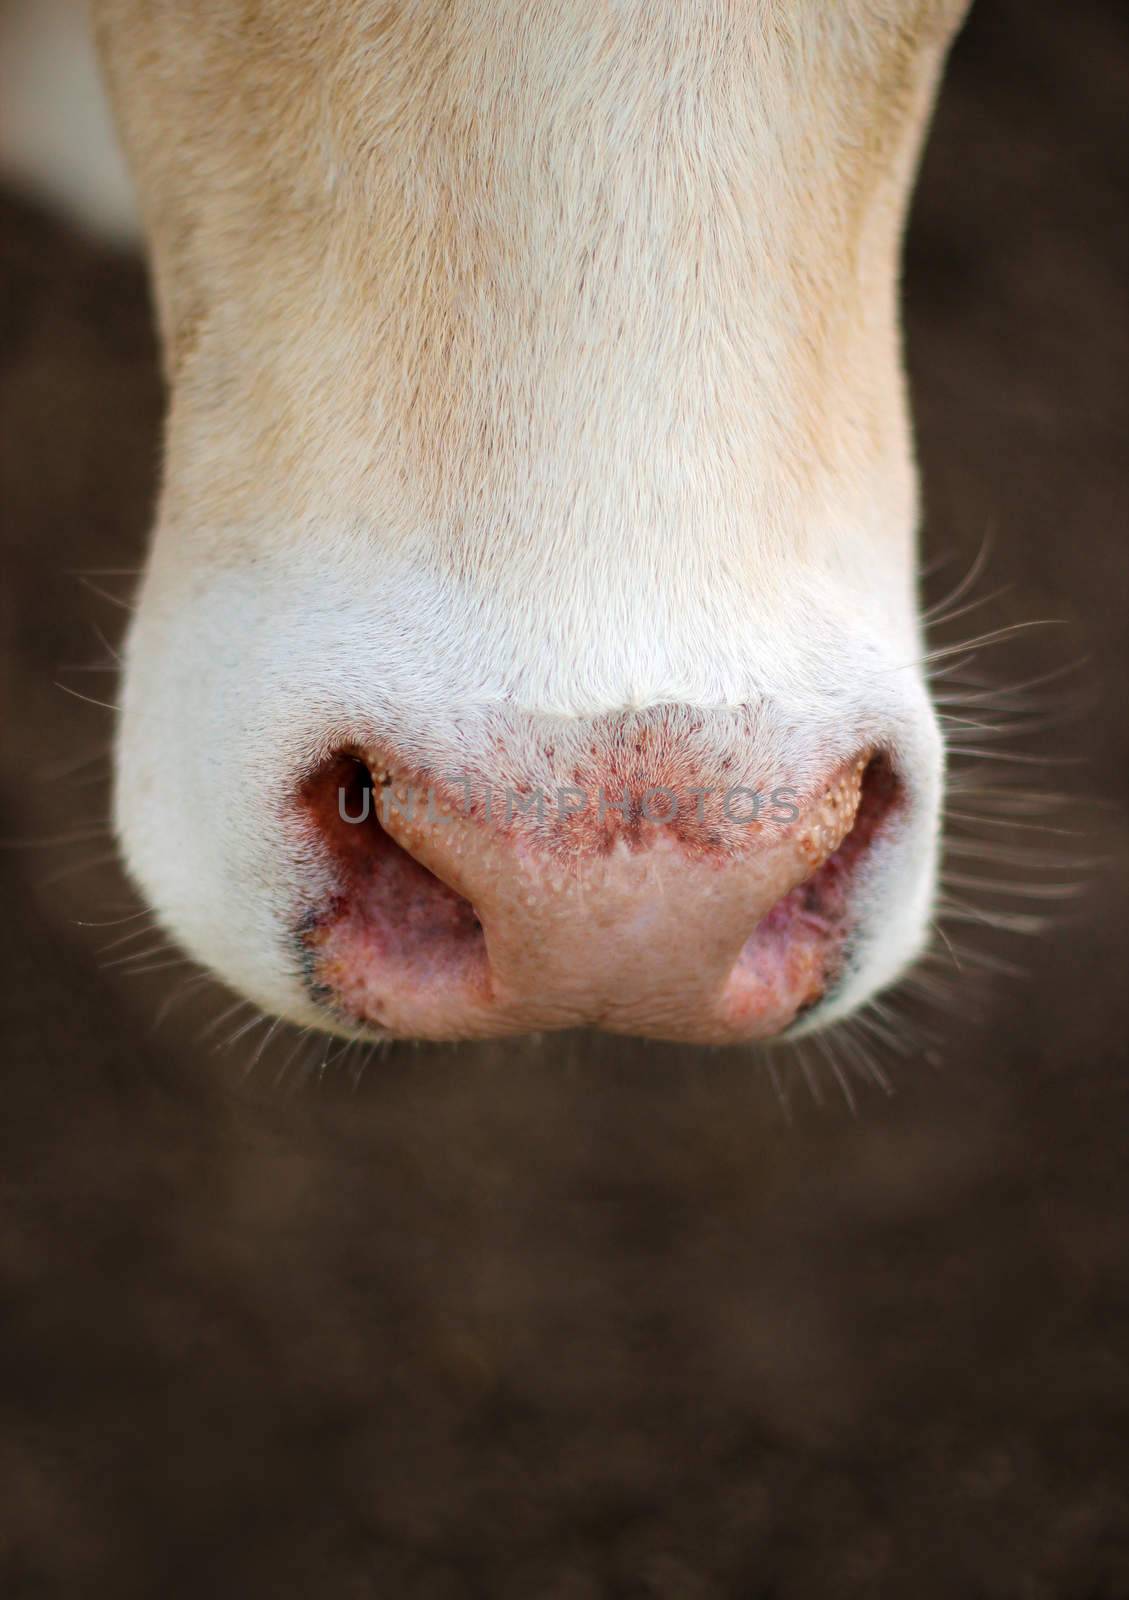 Cow nose close up on the nose sweat. by yod67